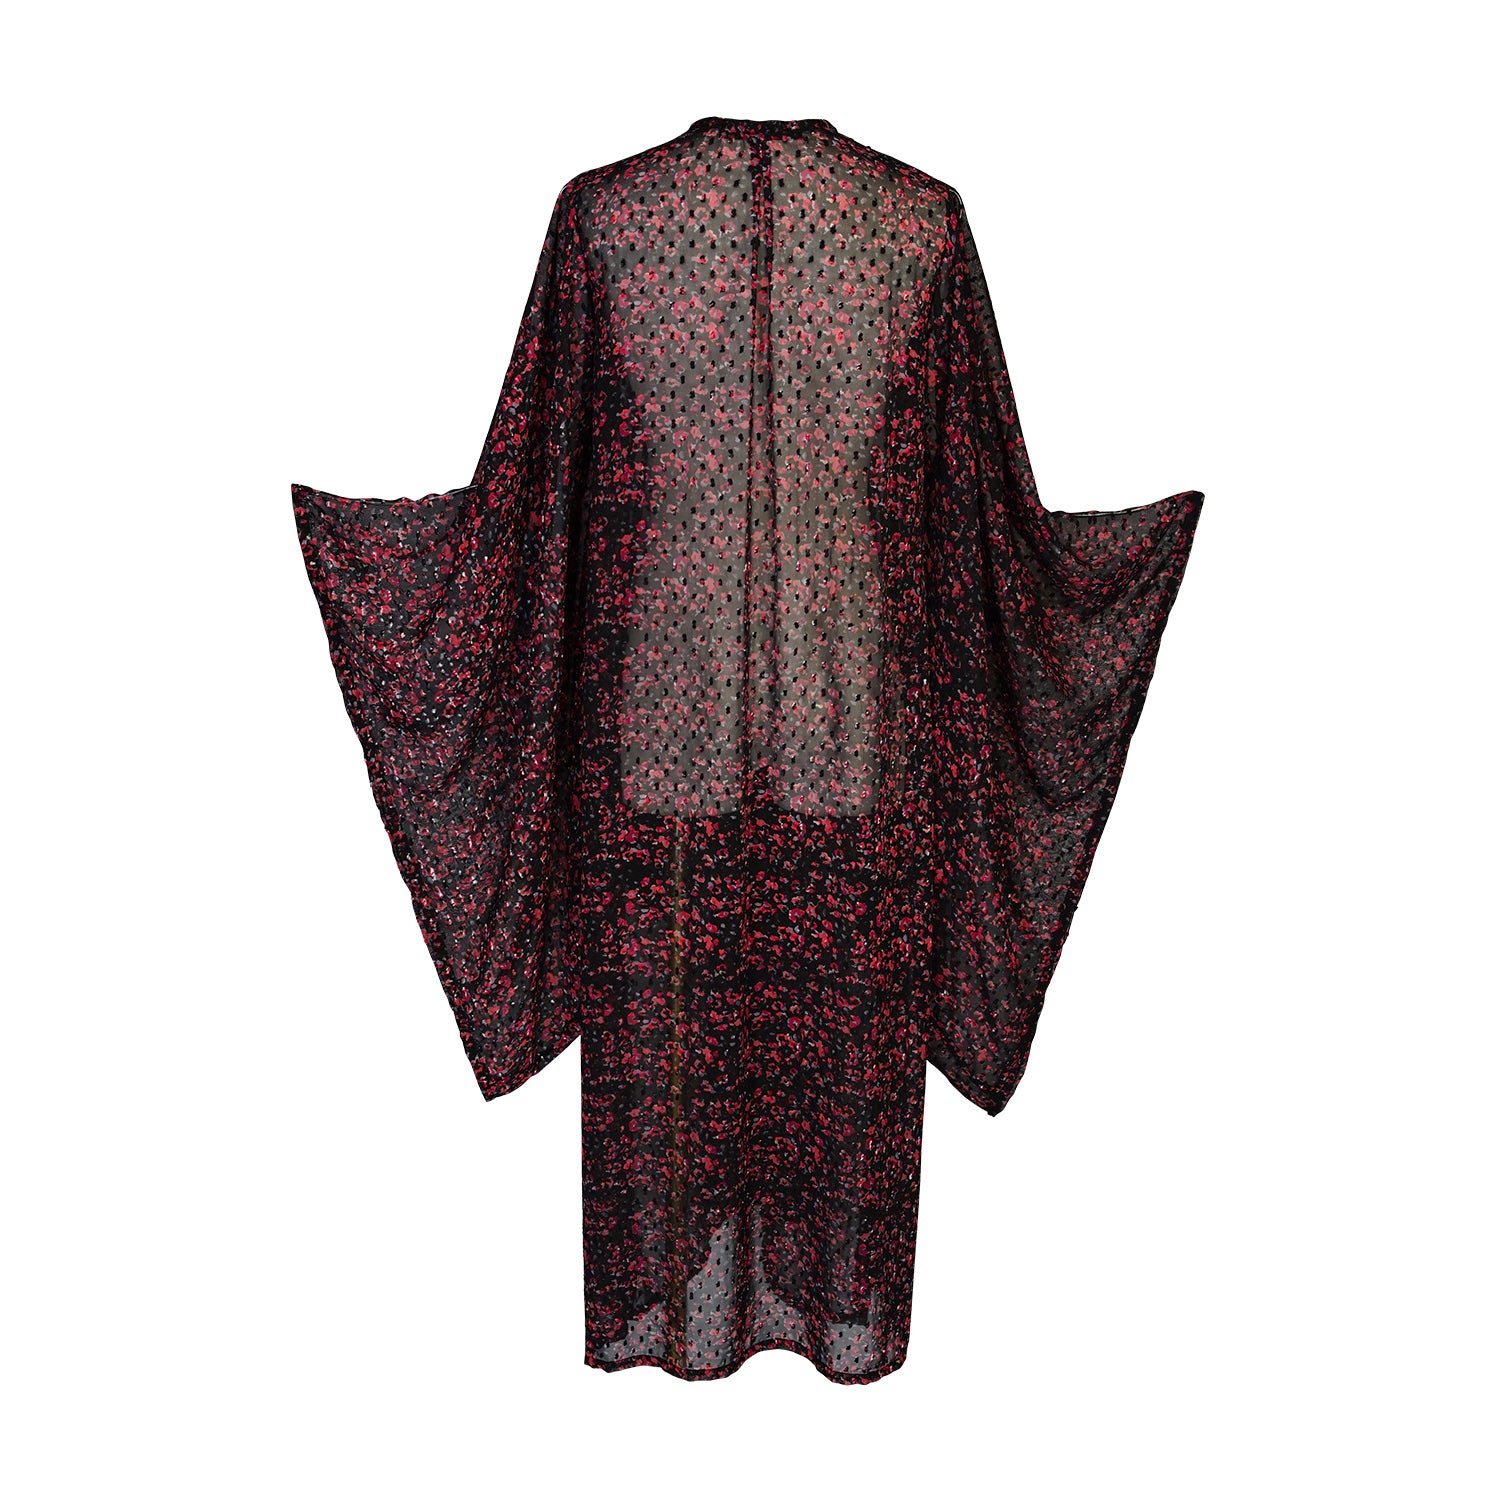 Dark red floral kimono robe with belt. Made from Swiss dot chiffon, its striking rouge floral pattern evokes a sense of mystery. Can be worn open as a robe or wrap dress. Long flowy sleeves with ankle hem.